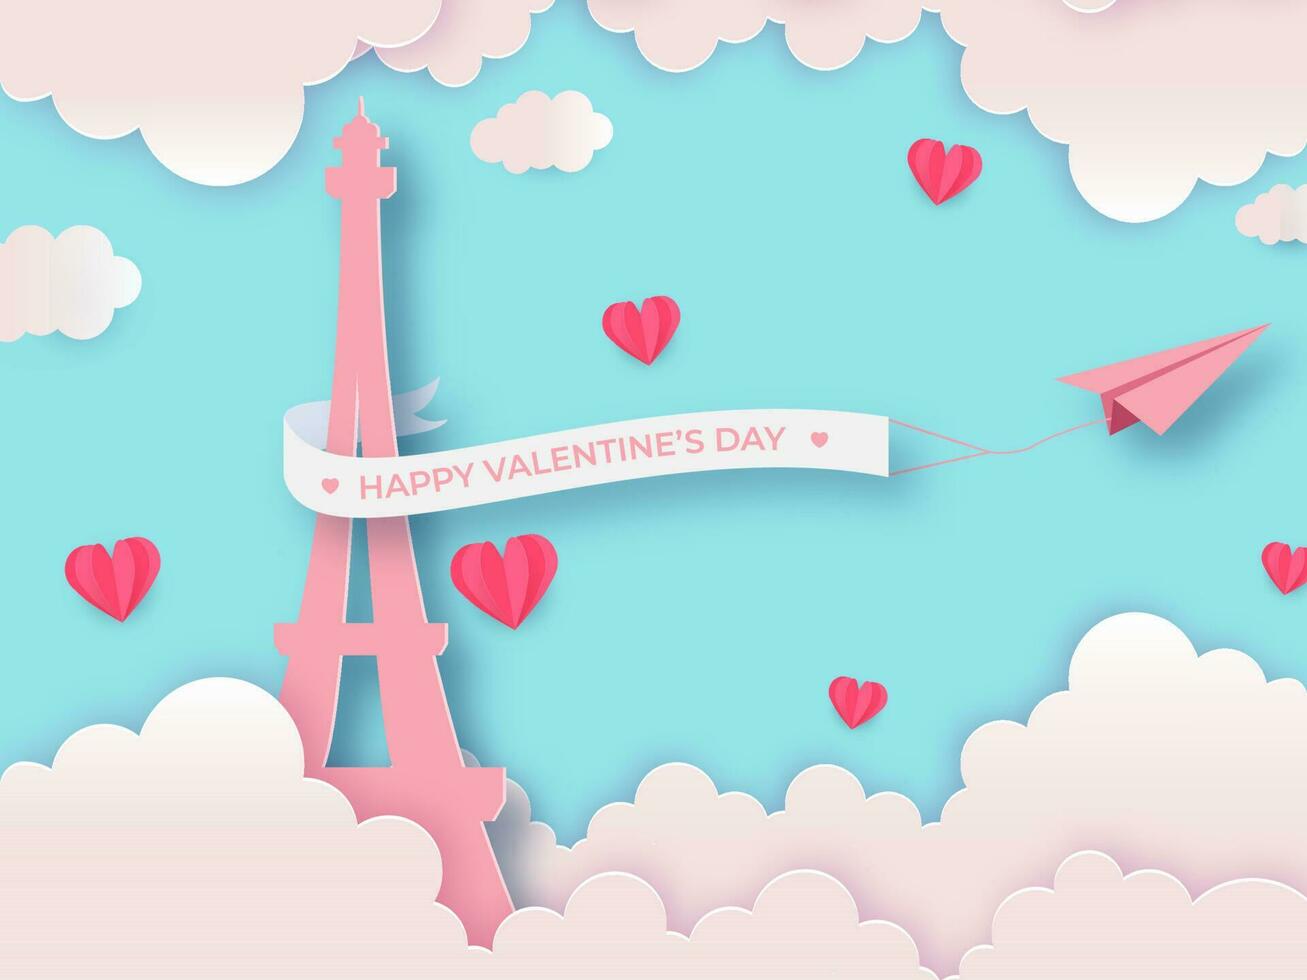 Happy Valentine's Day Text Ribbon With Paper Plane, Eiffel Tower, Hearts And Clouds On Sky Blue Background. vector